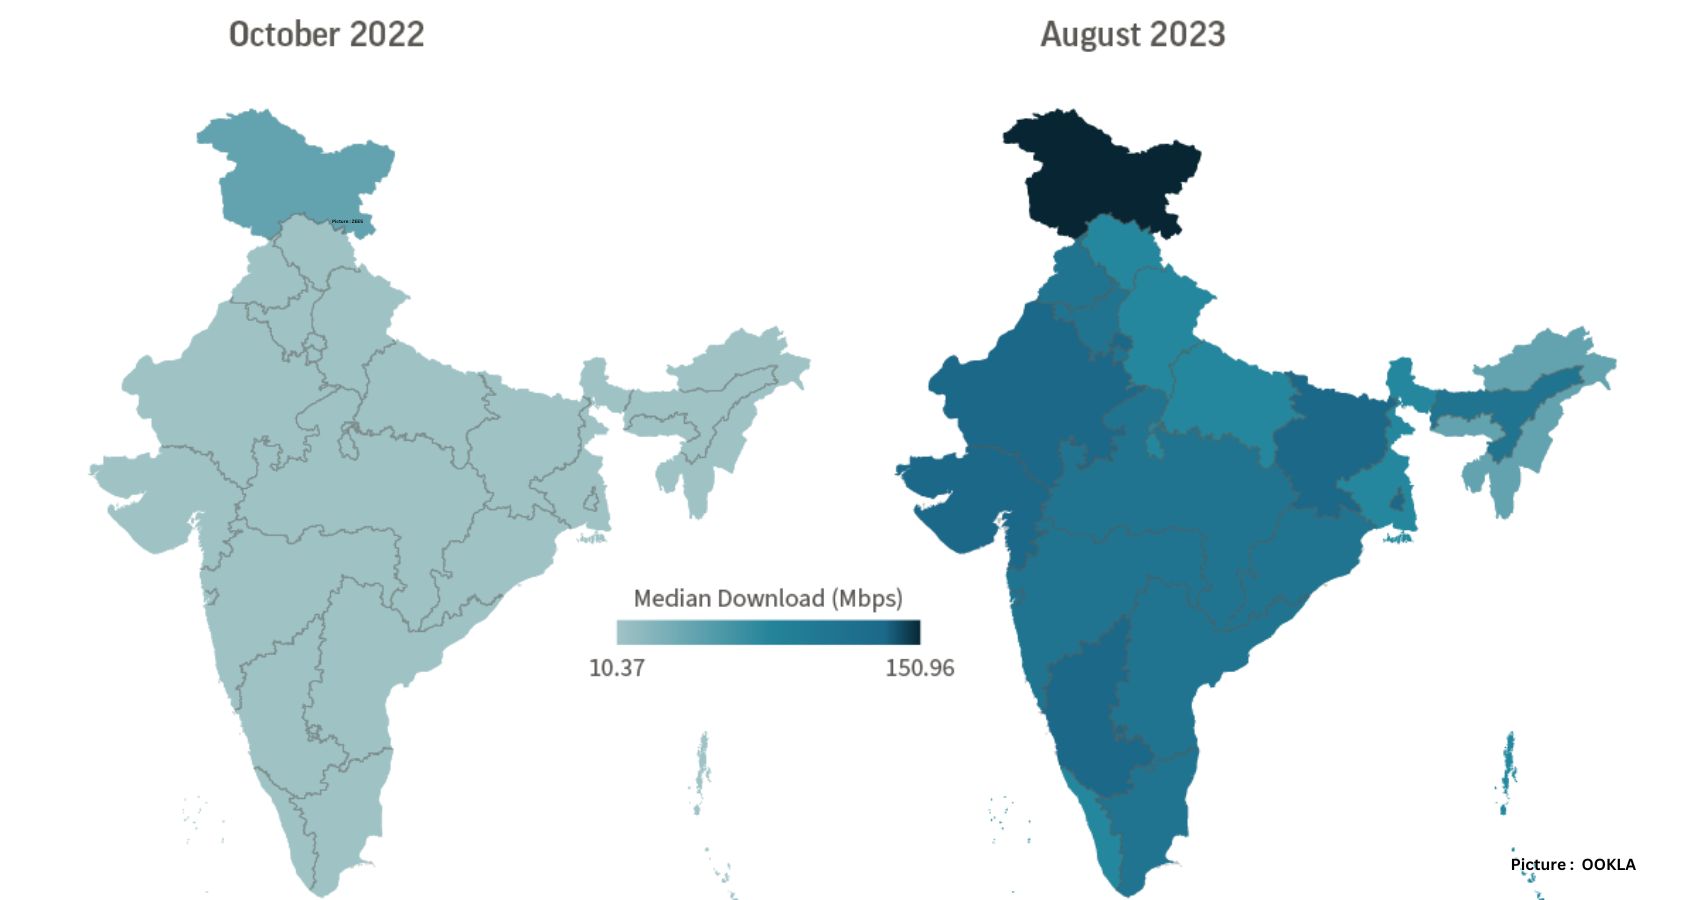 Featured & Cover India's Mobile Download Speeds Soar Climbing 72 Places on Global Index Thanks to 5G Adoption